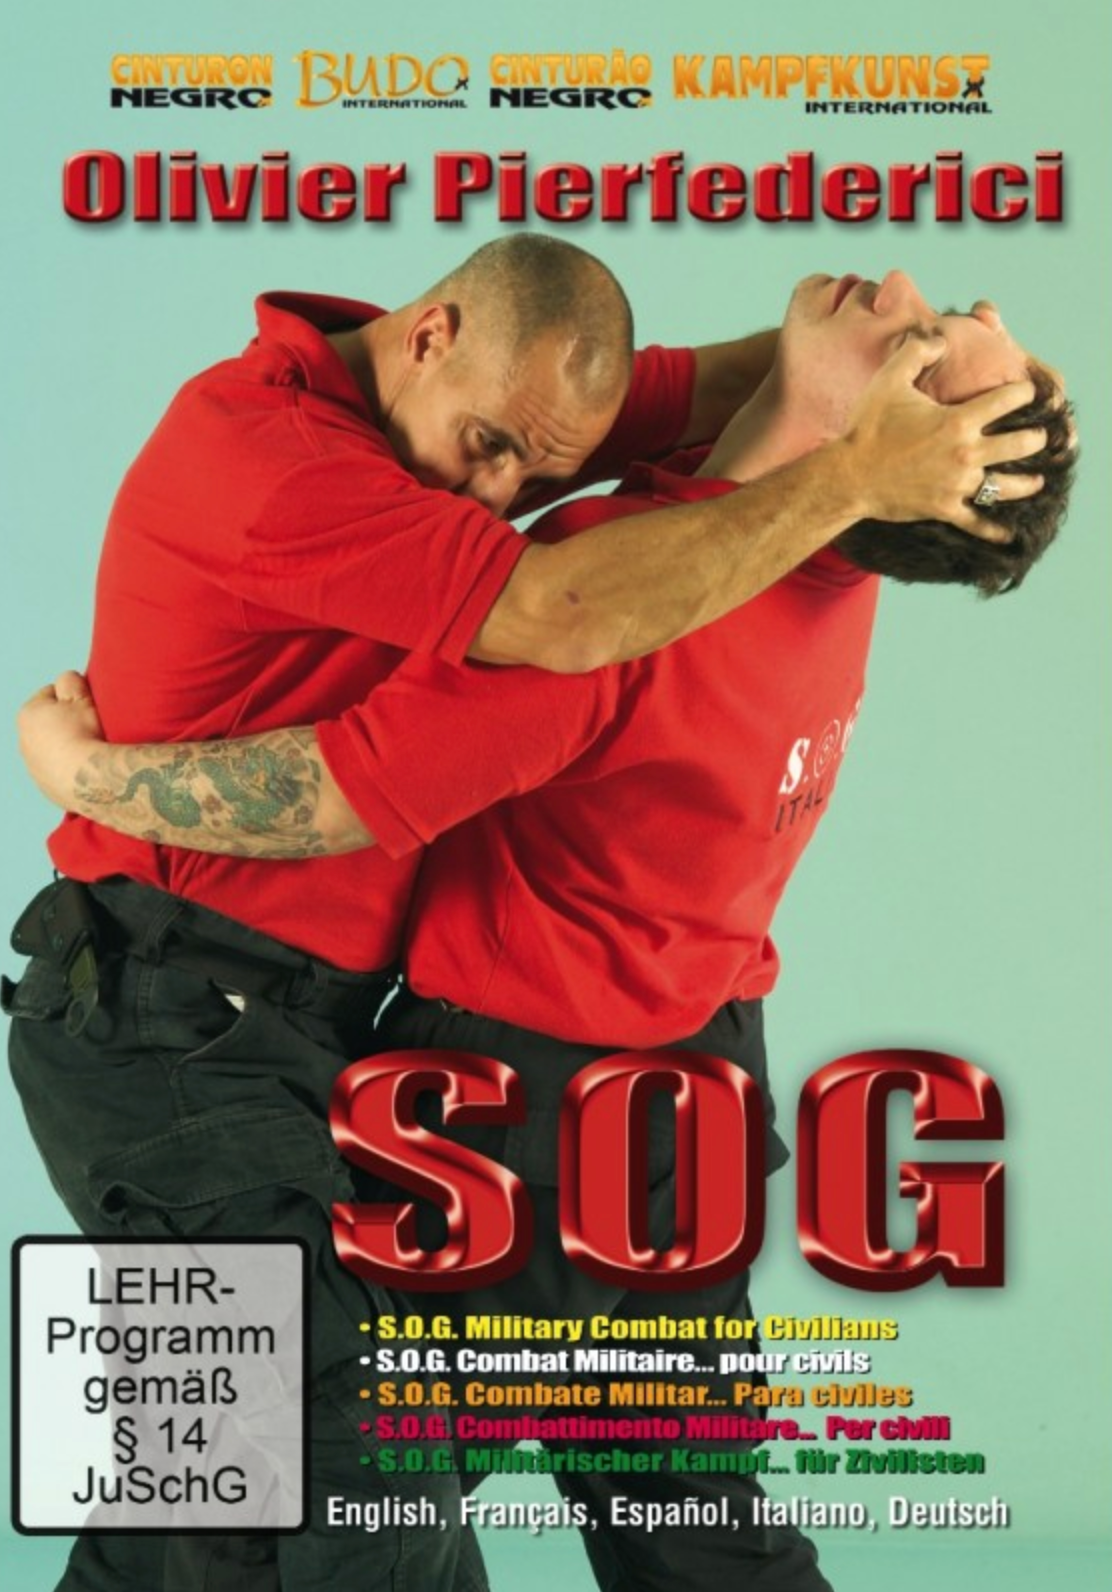 Military SOG for Civilians DVD with Olivier Pierfedericci - Budovideos Inc